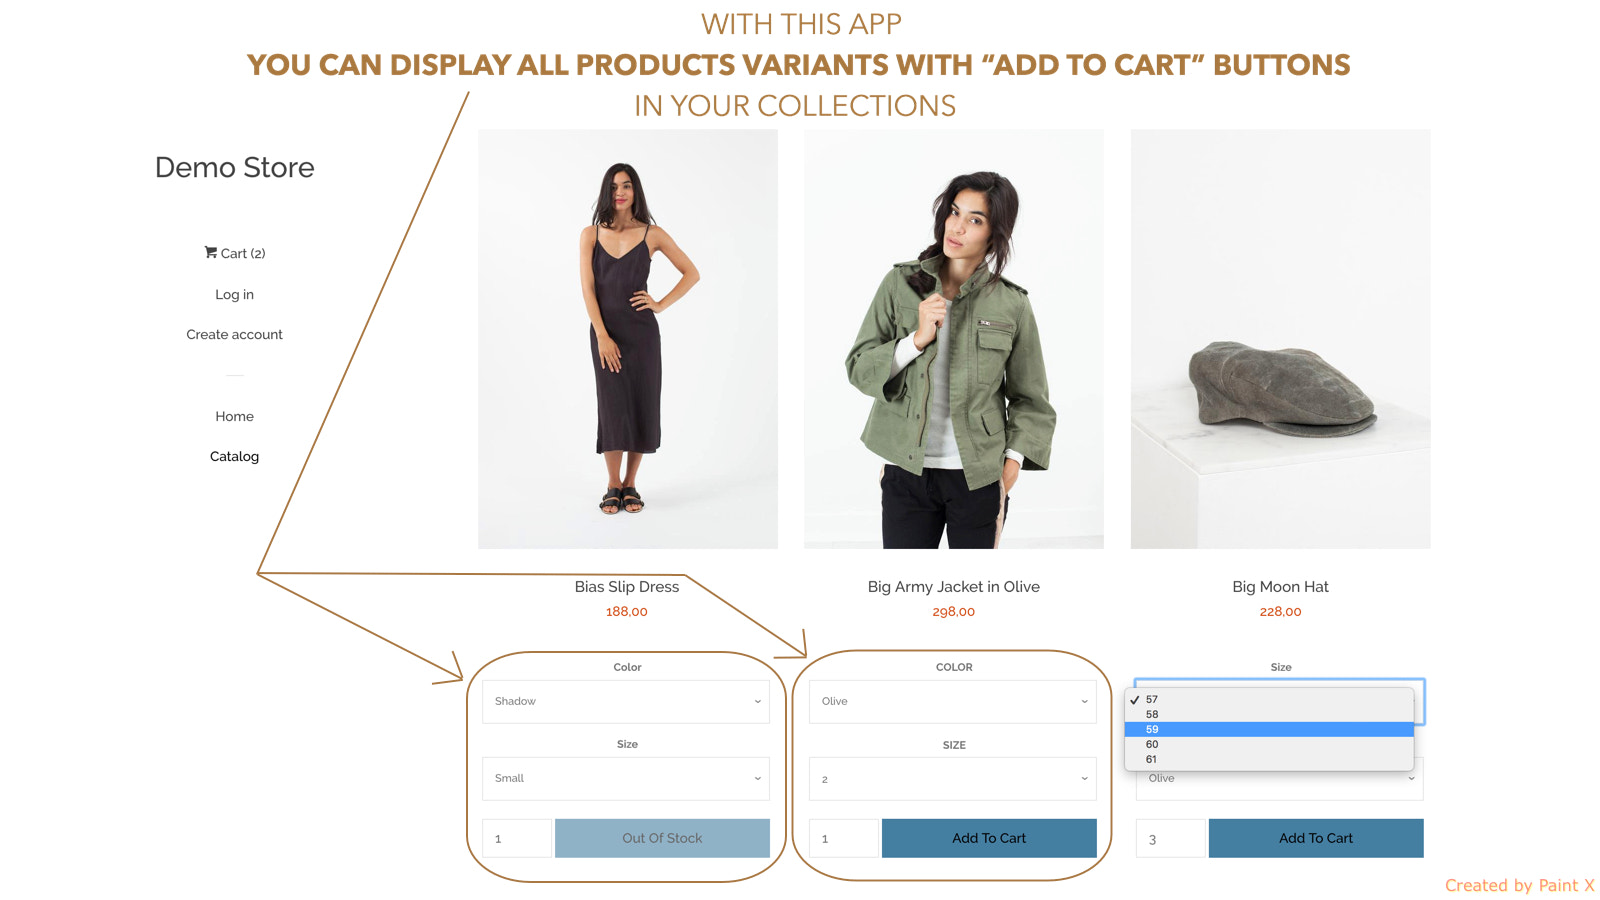 You can display variants for each product in collections